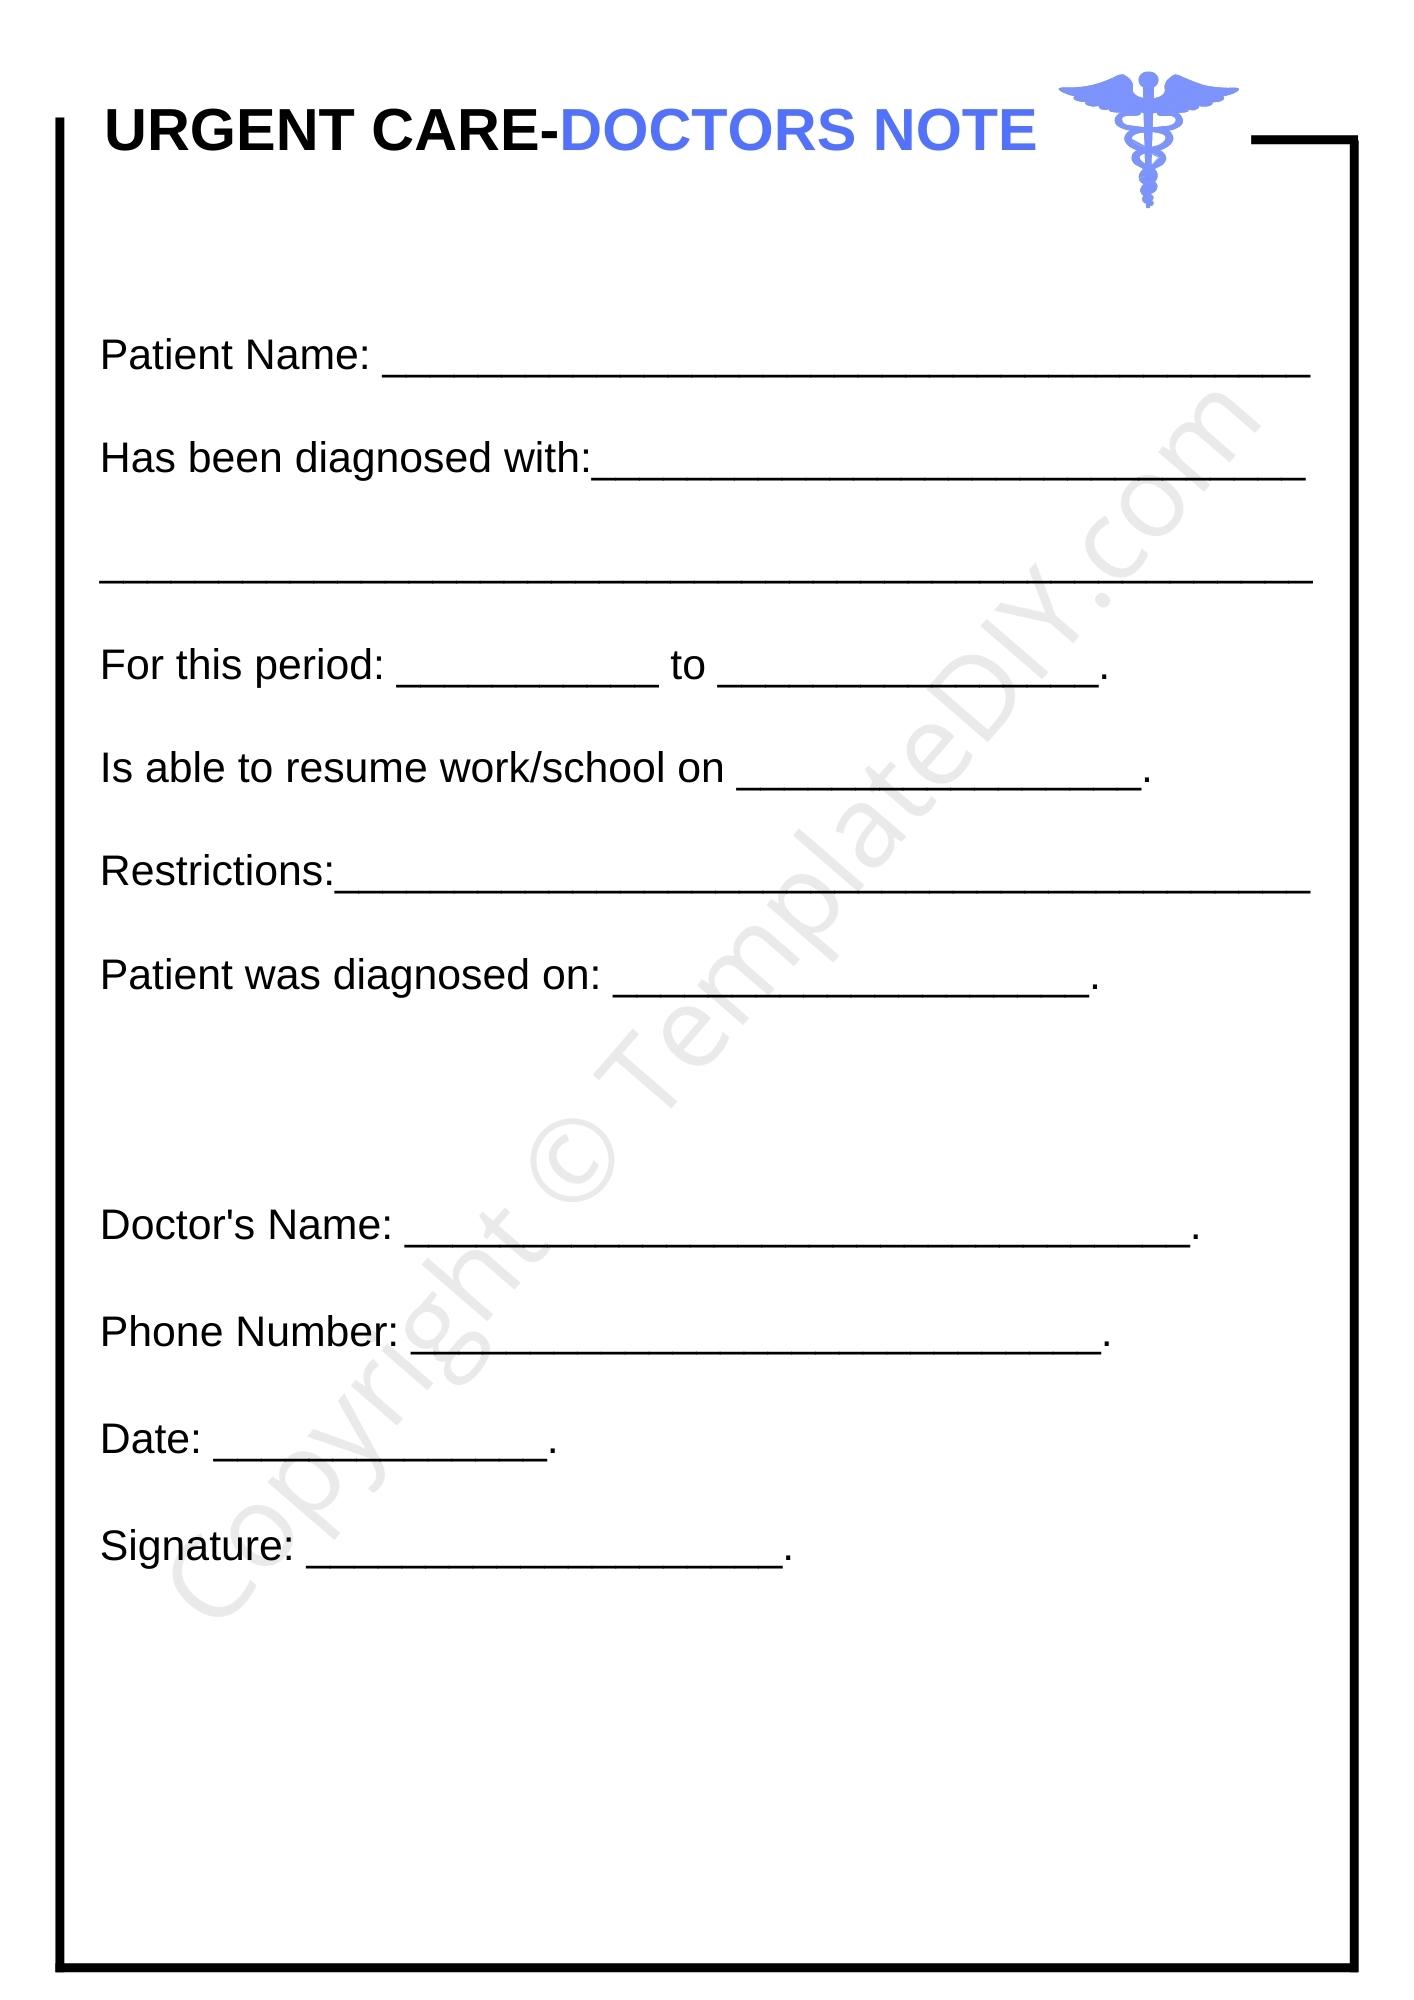 Urgent Care Doctors Note Printable Template in PDF Word